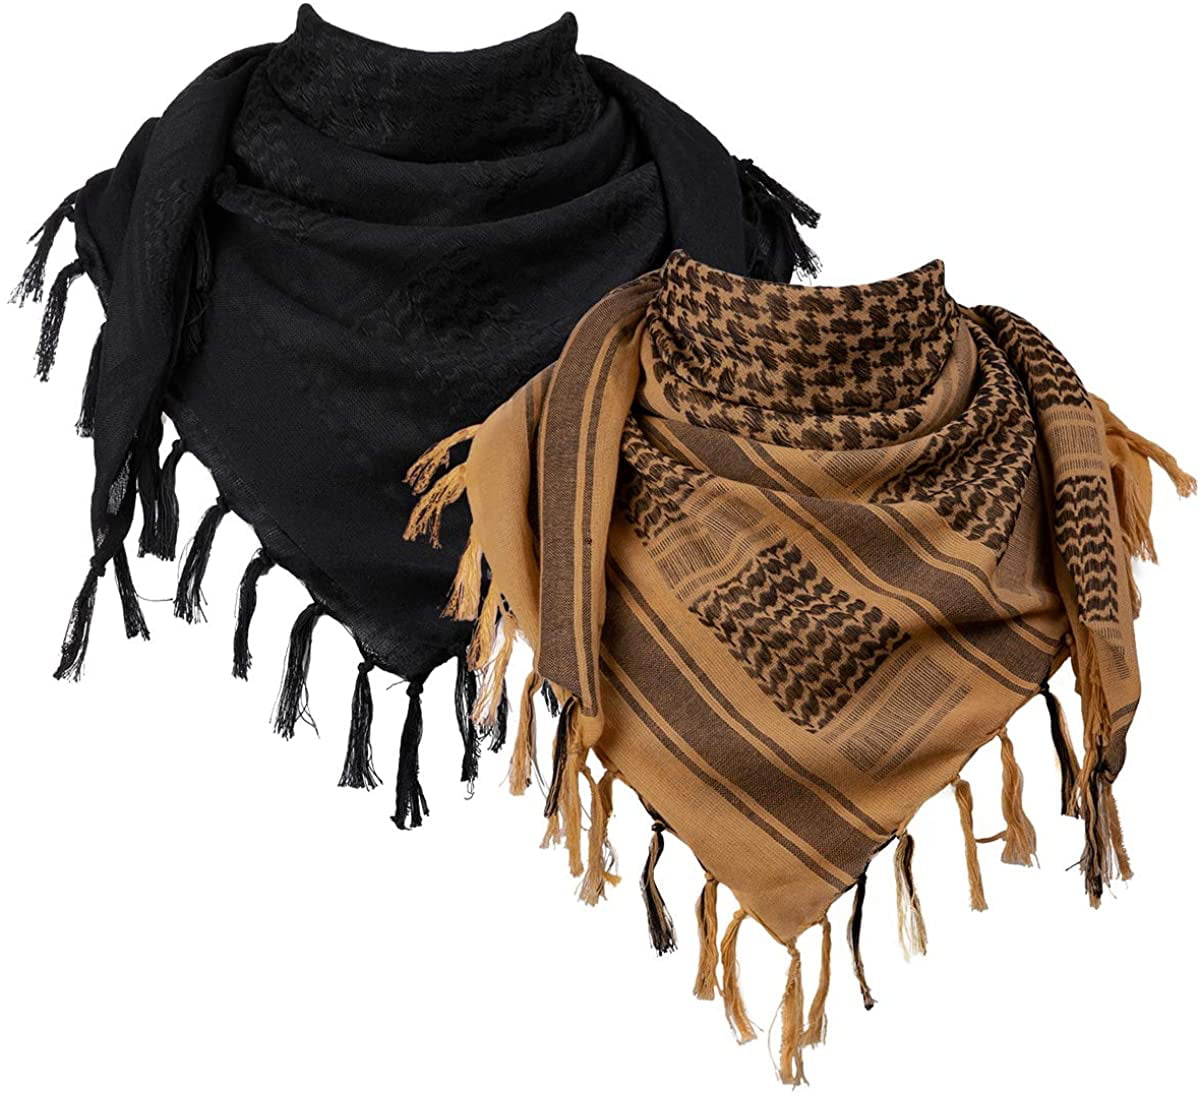 Military Shemagh Tactical Scarf Cotton Keffiyeh Desert Head Neck Arab Scarf with Tassel 43 x 43 Inch 